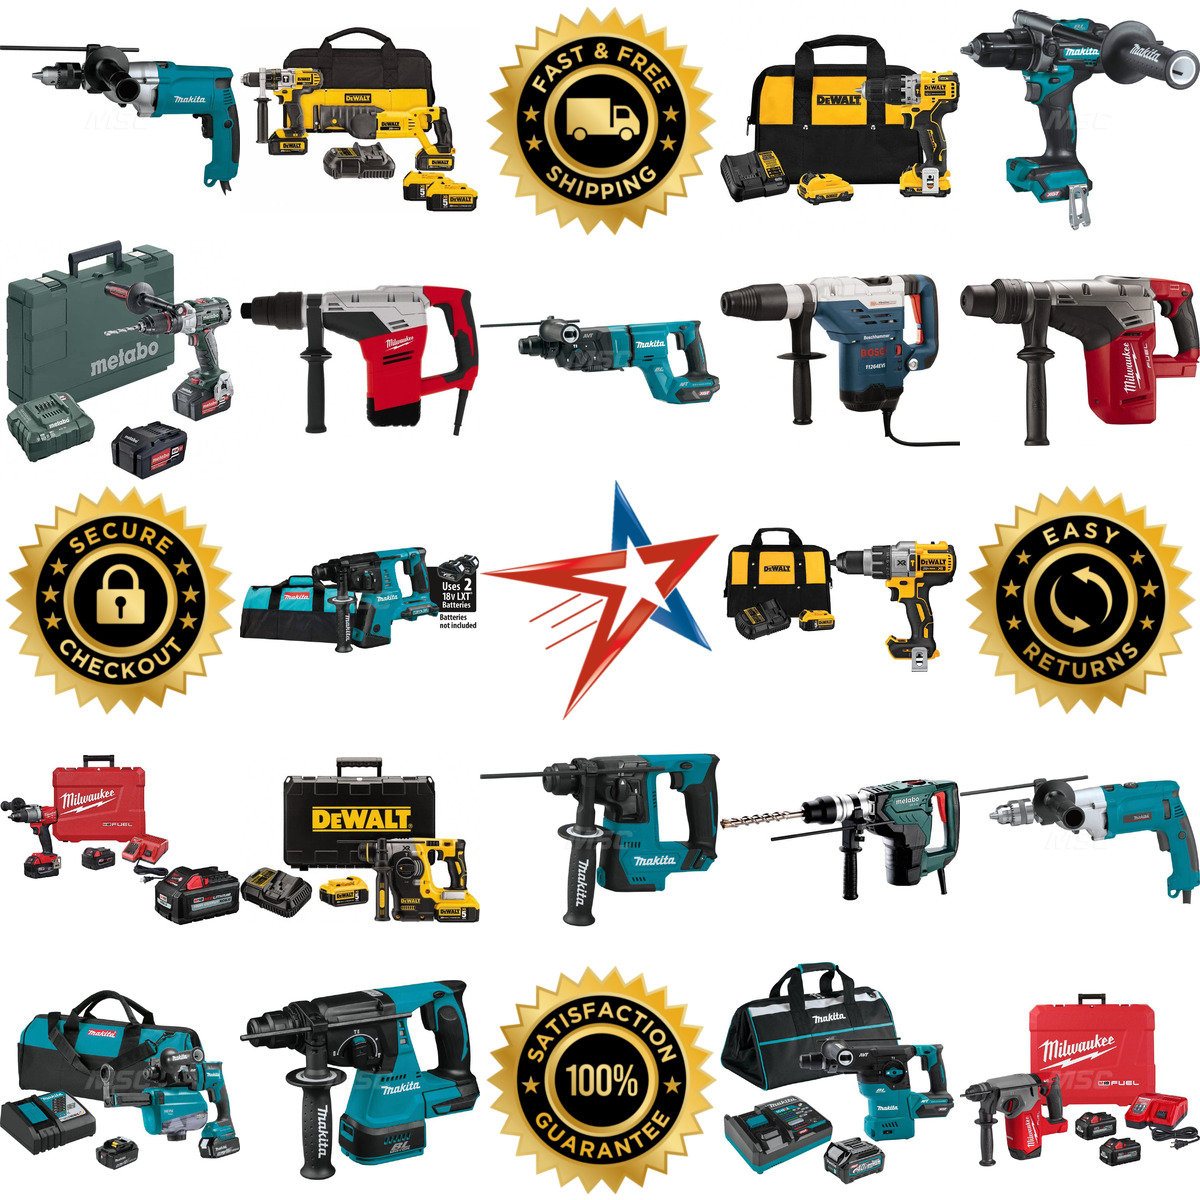 A selection of Hammer Drills and Rotary Hammers products on GoVets